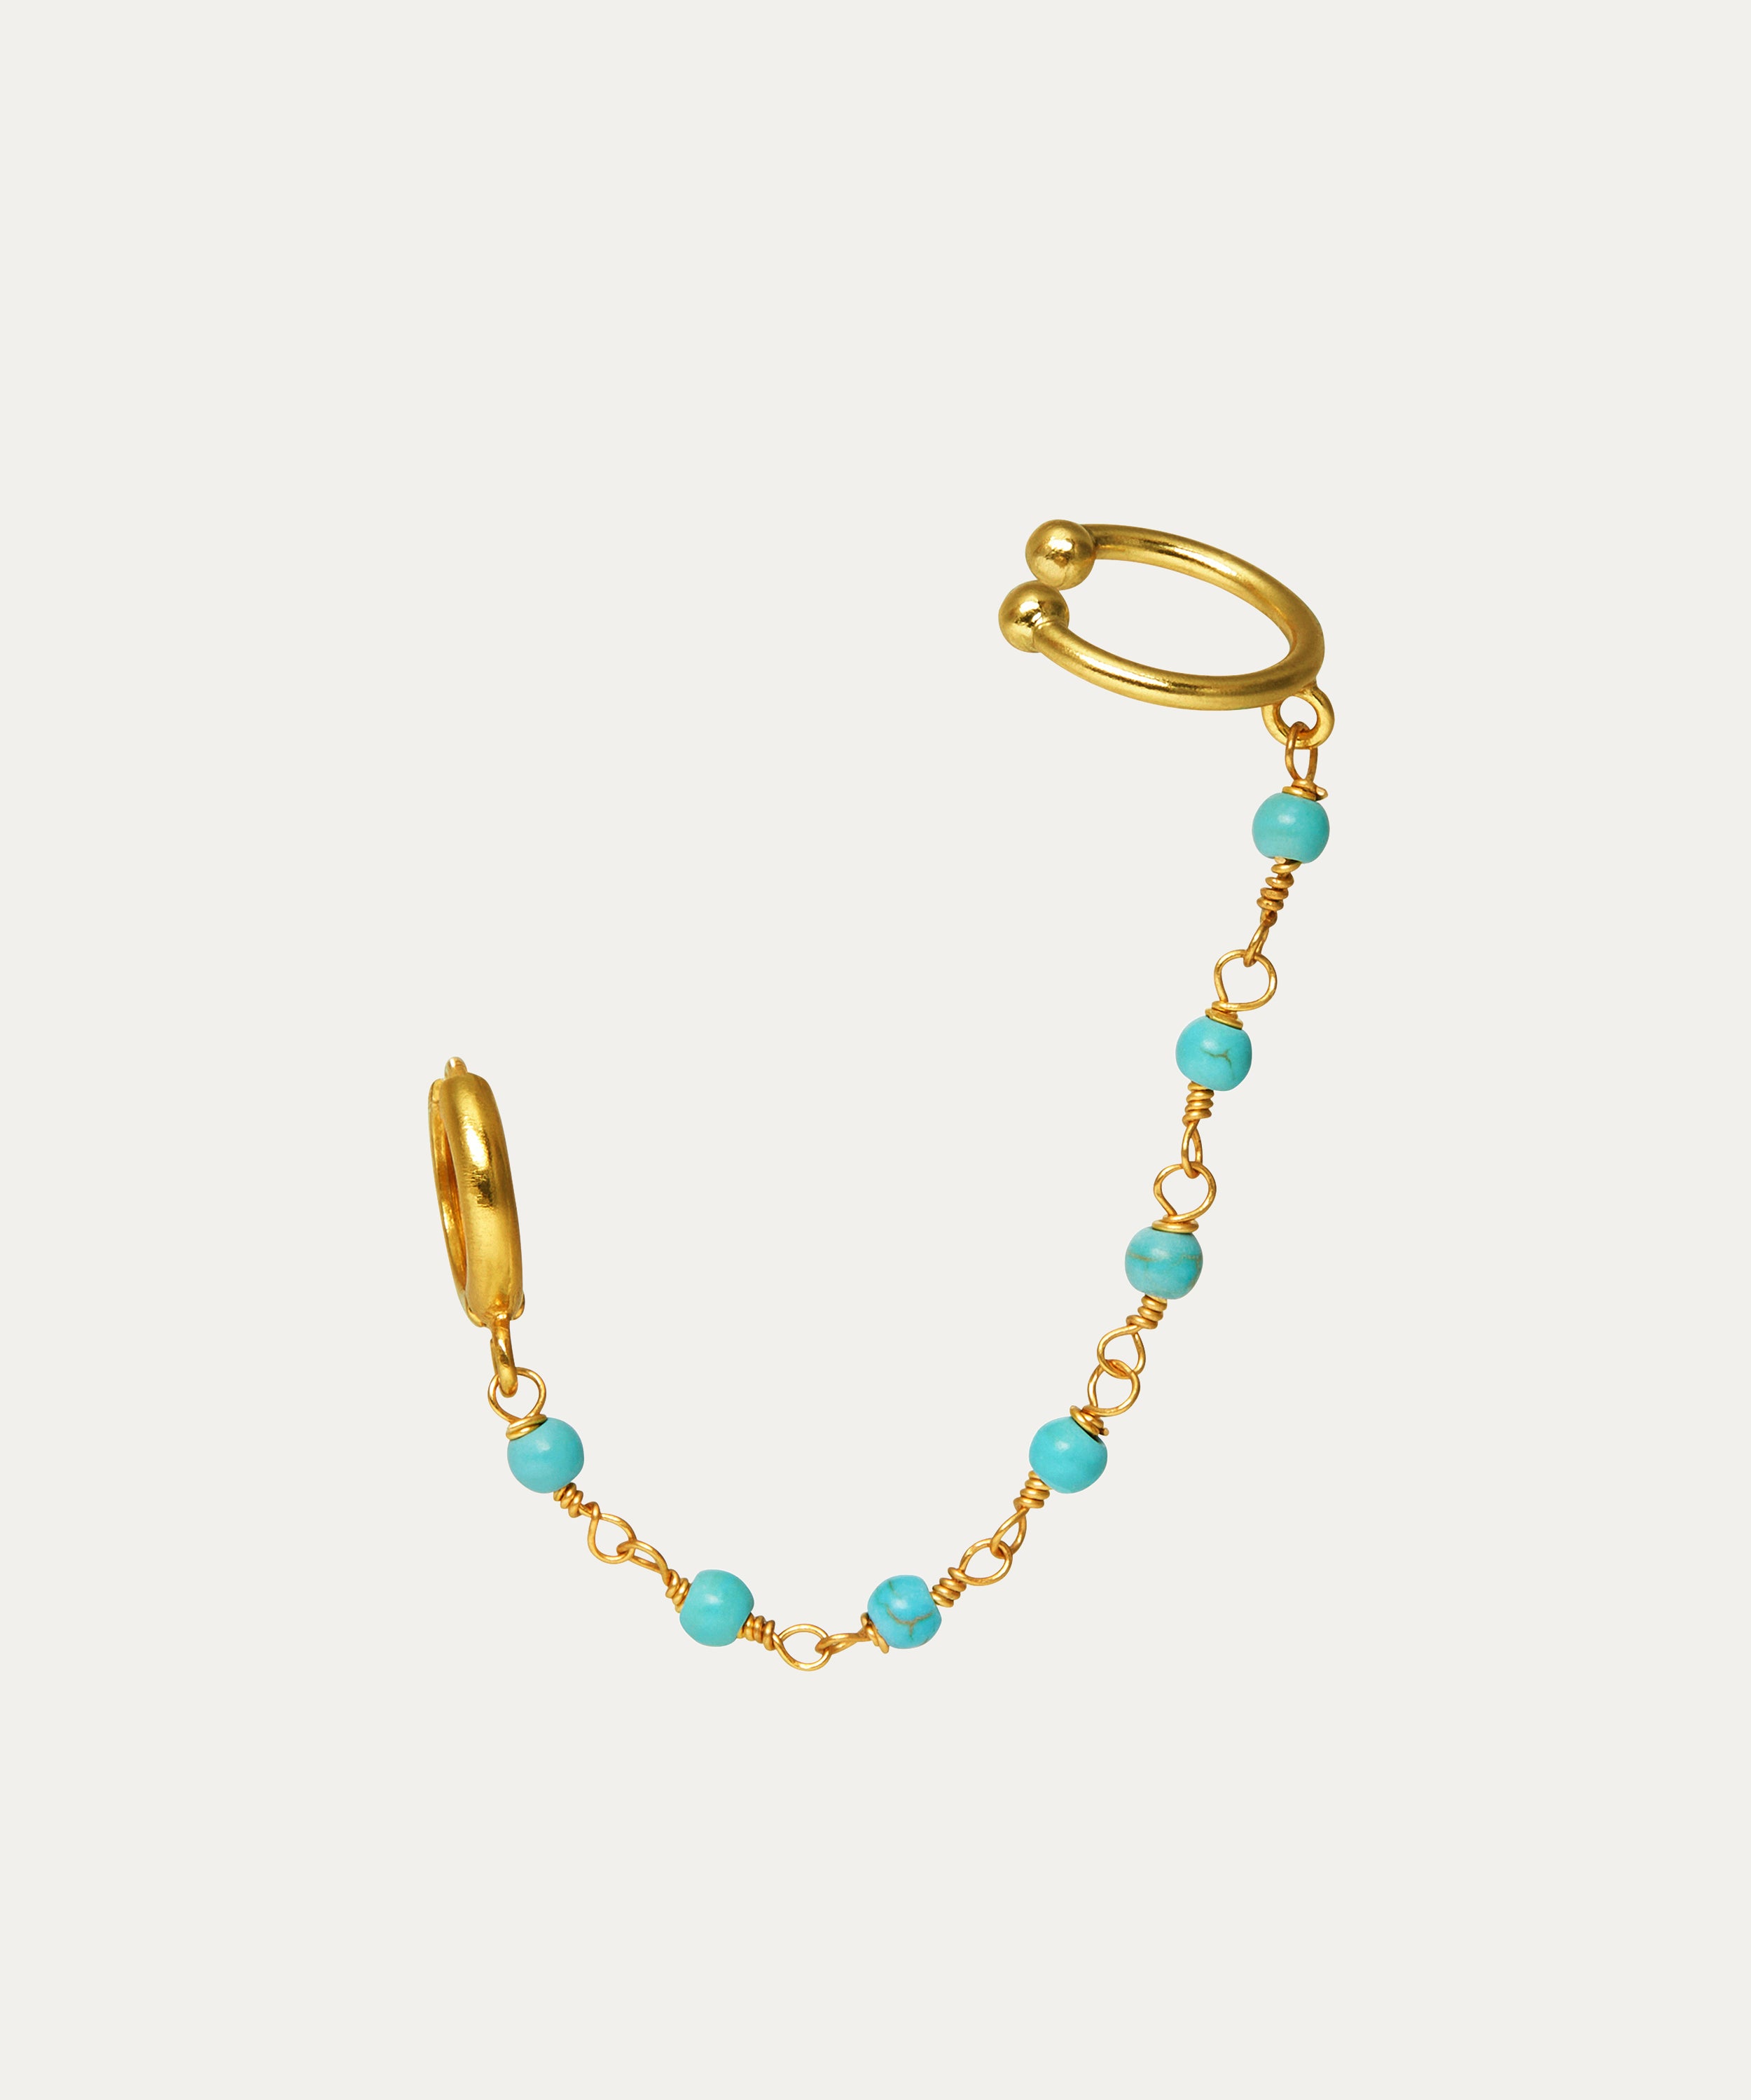 Nox Turquoise Beaded Ear Cuff | Sustainable Jewellery by Ottoman Hands